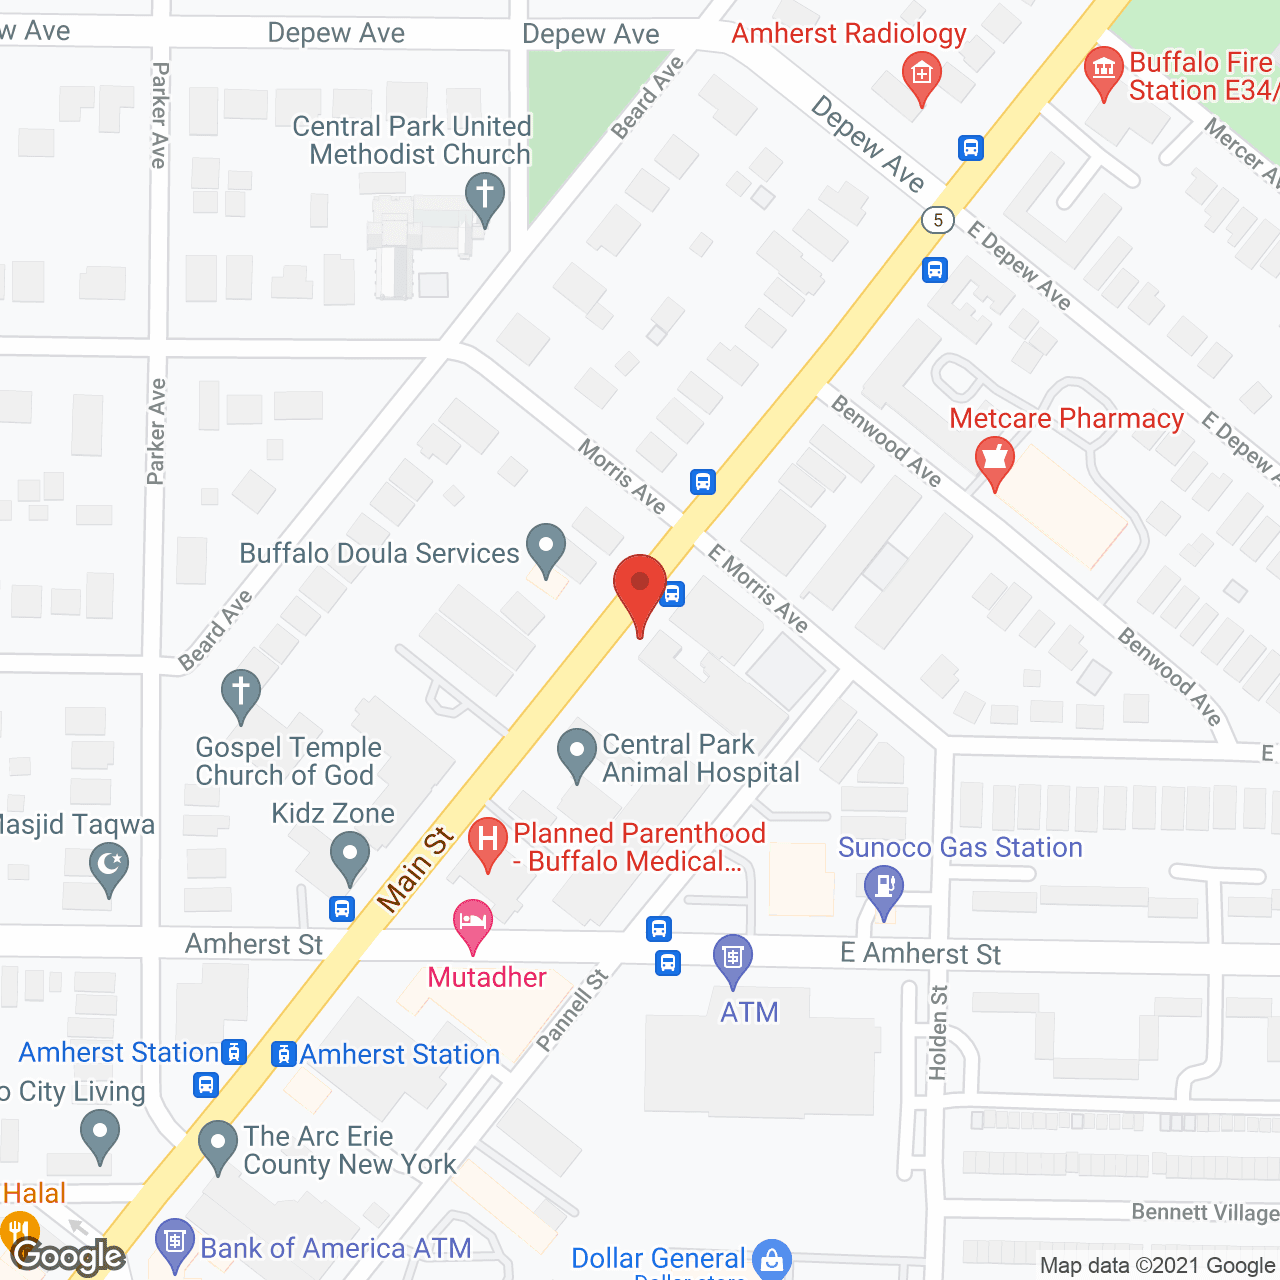 Oasis Care Services in google map